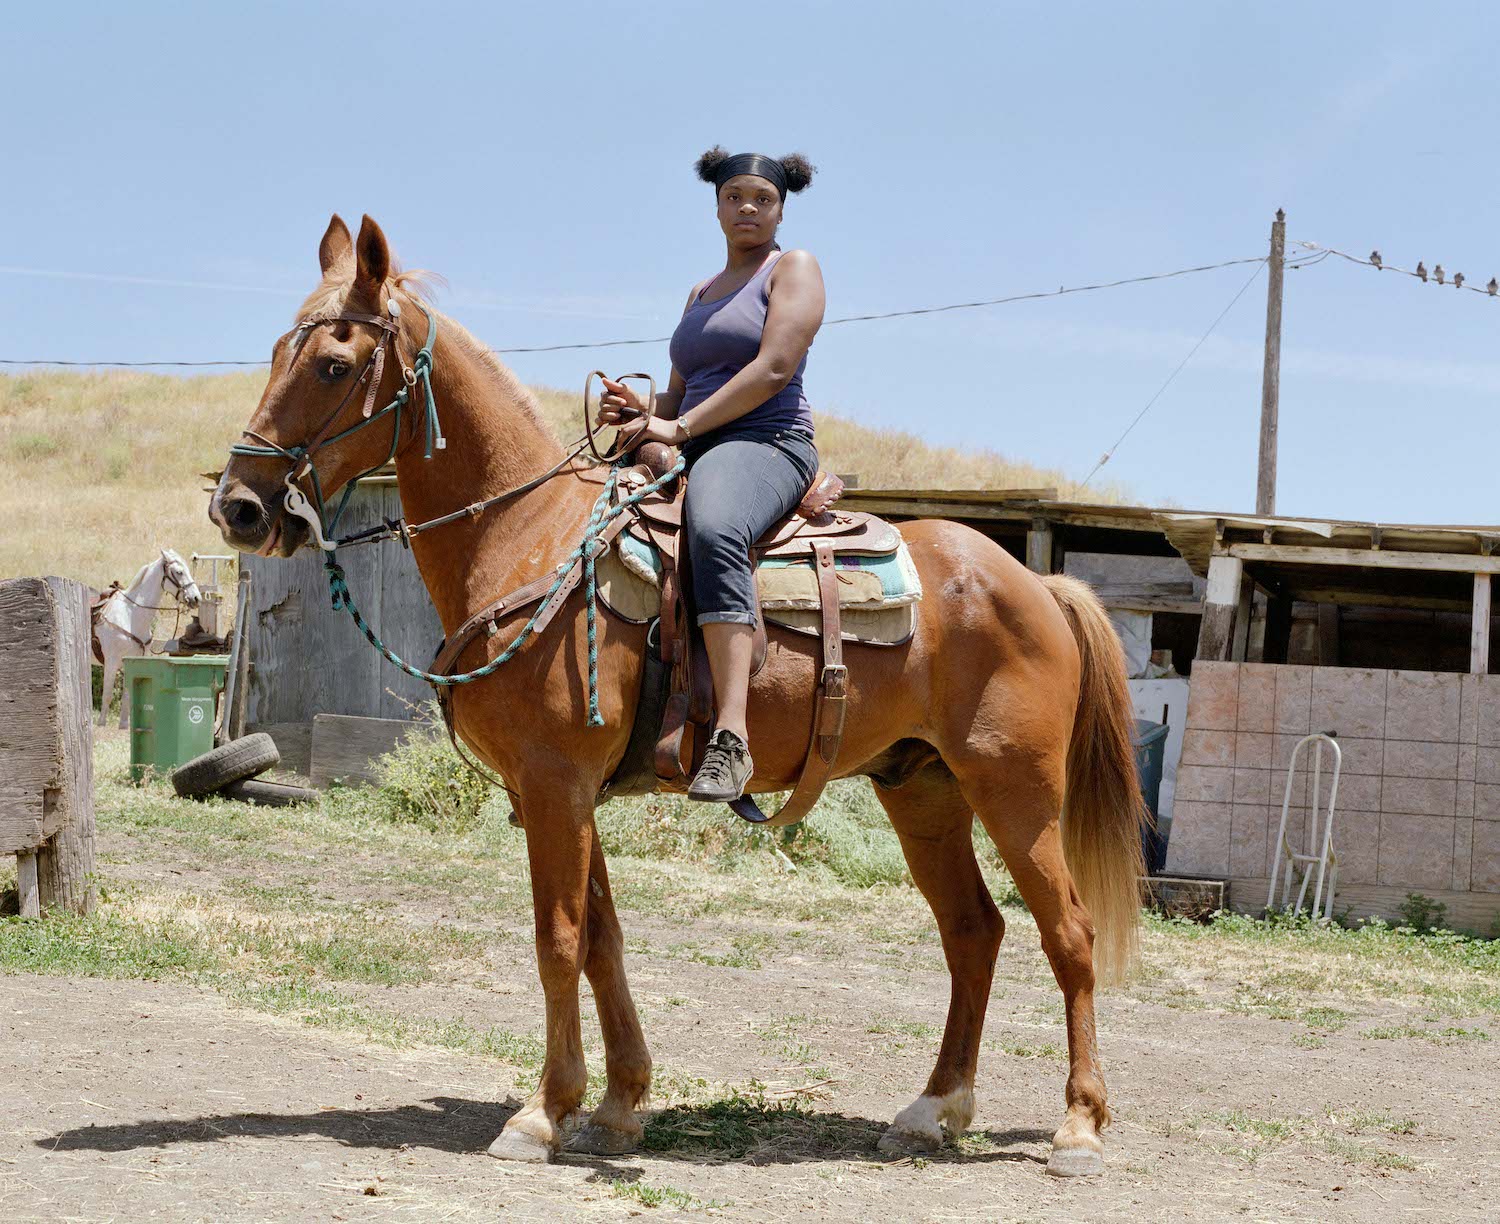 A Black woman on horseback from a photograph in Gabriela Hasbun's new book "The New Black West"